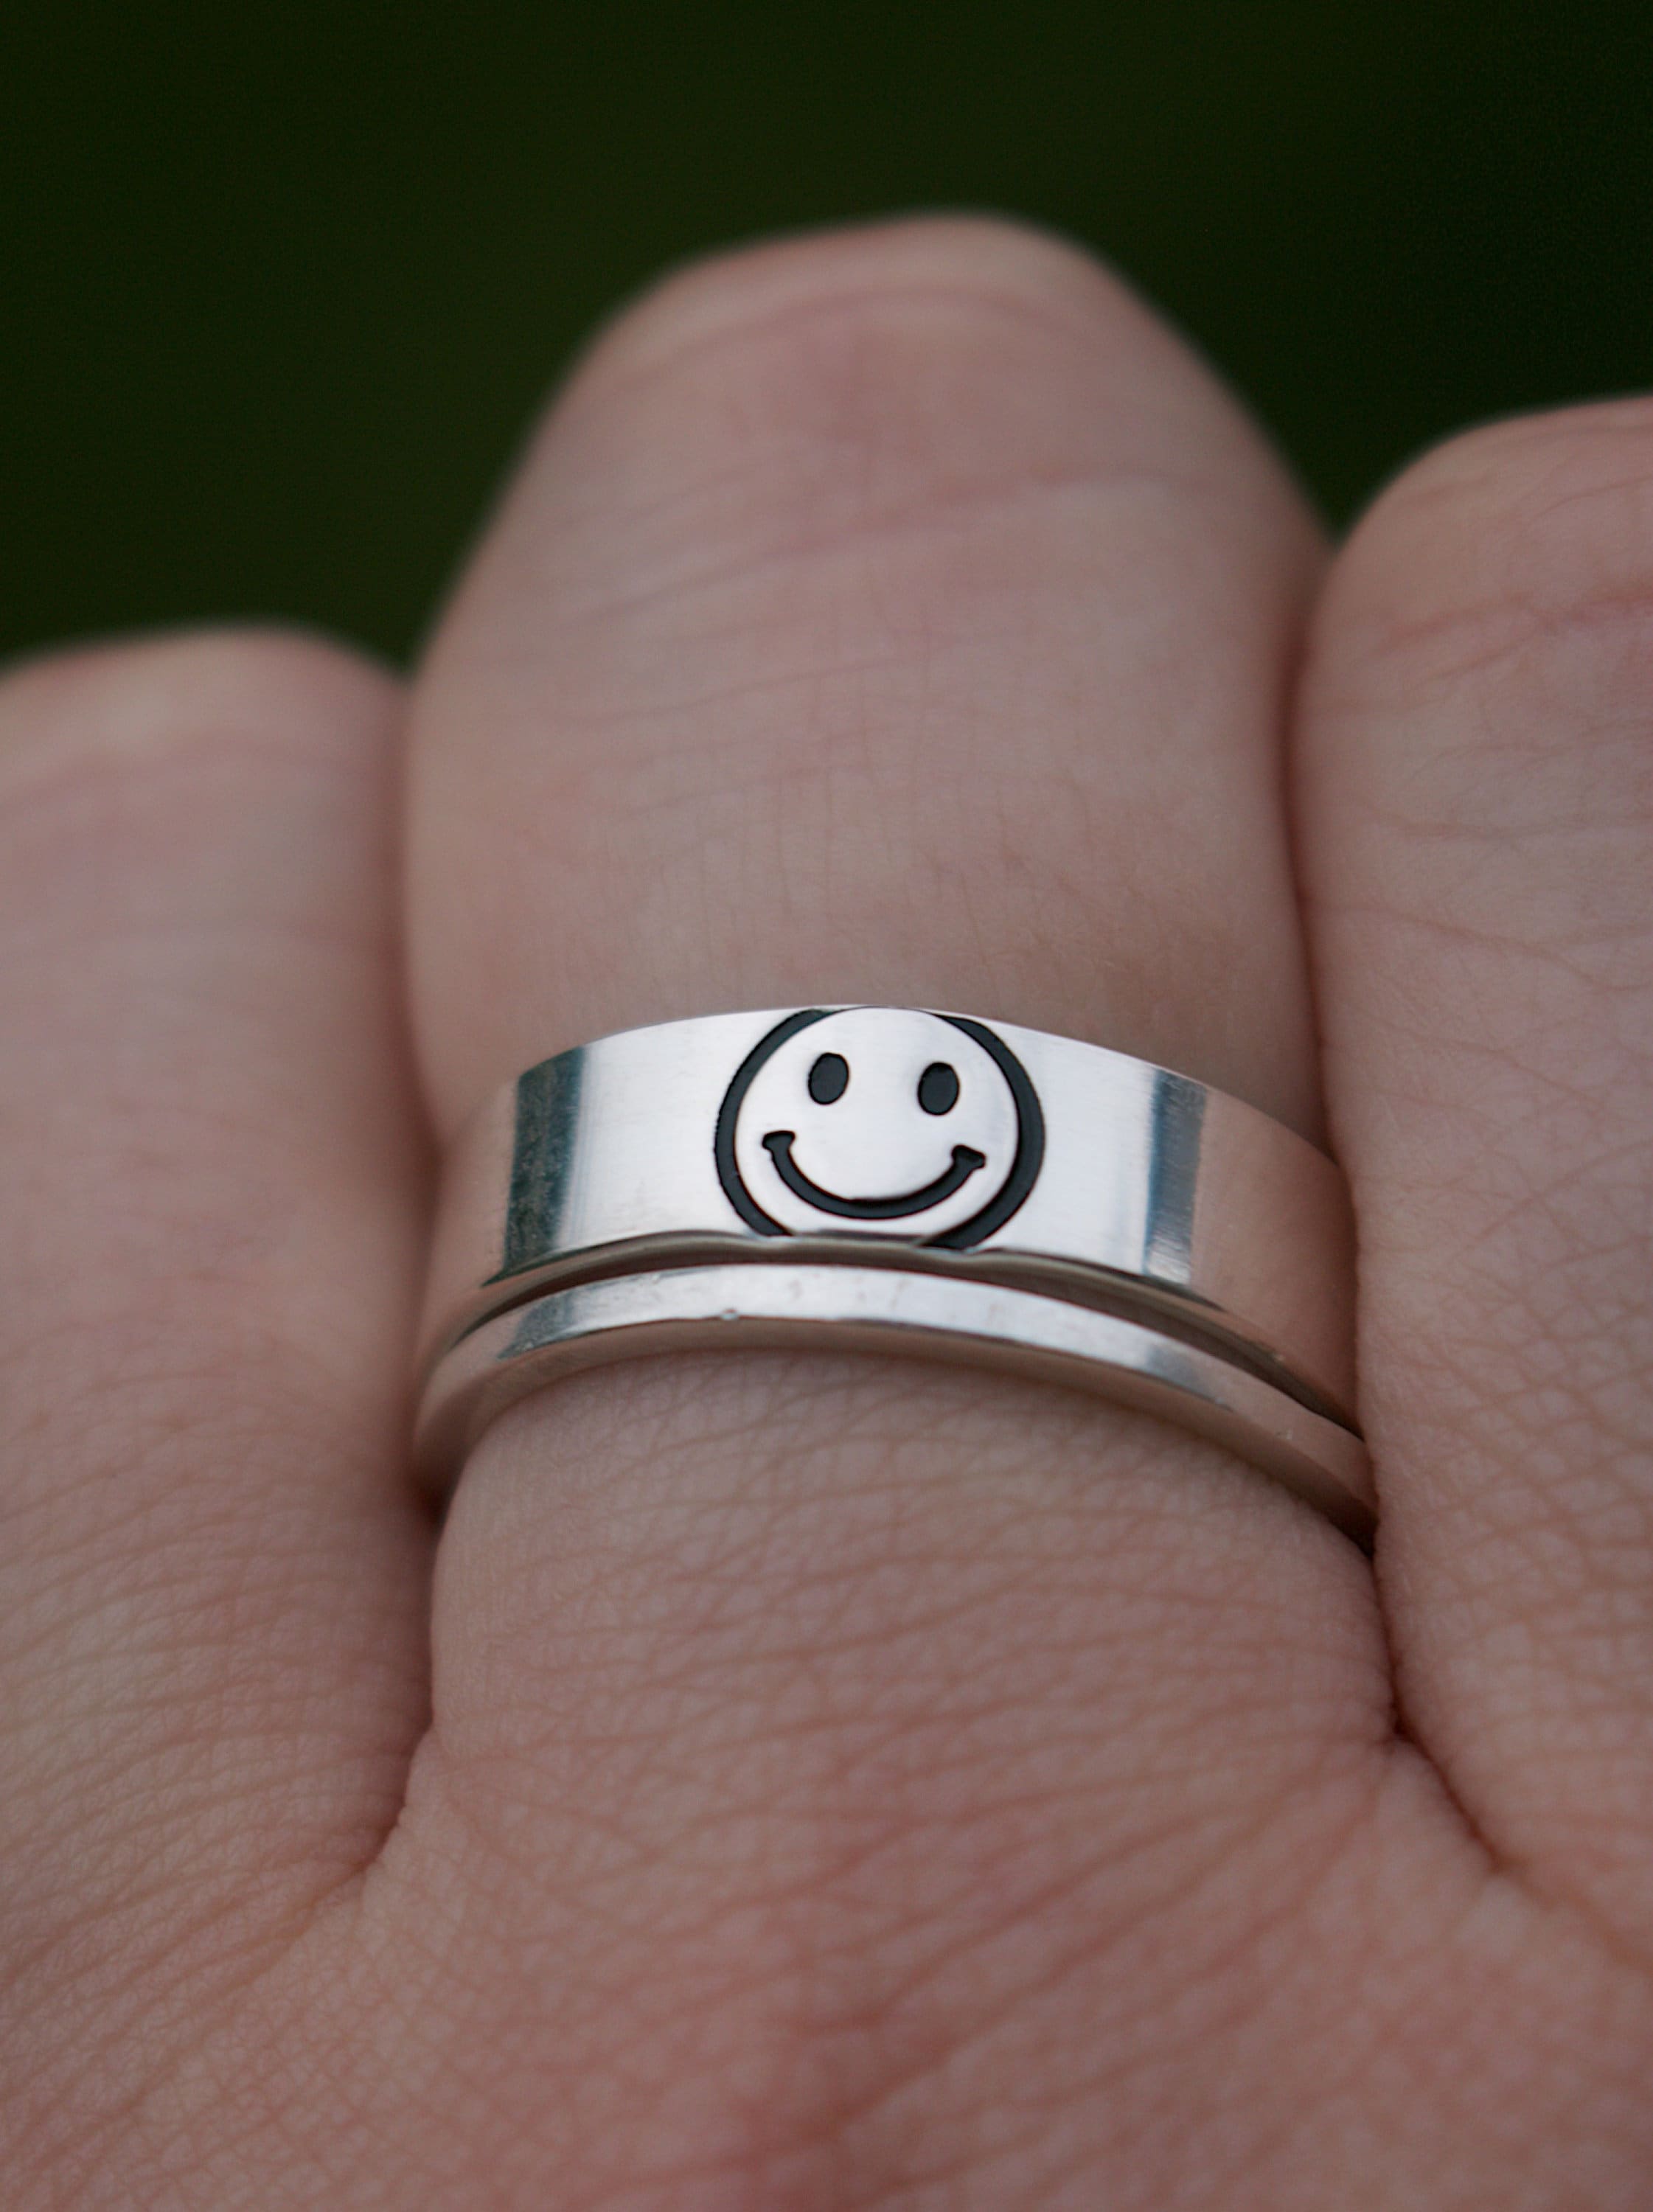 Retro Smiley Face Ring | 90s Y2K Jewelry | Friendship Rings | Best Friend Birthday Gift | Happy Face Ring | Vintage Smile Ring | Trendy Ring